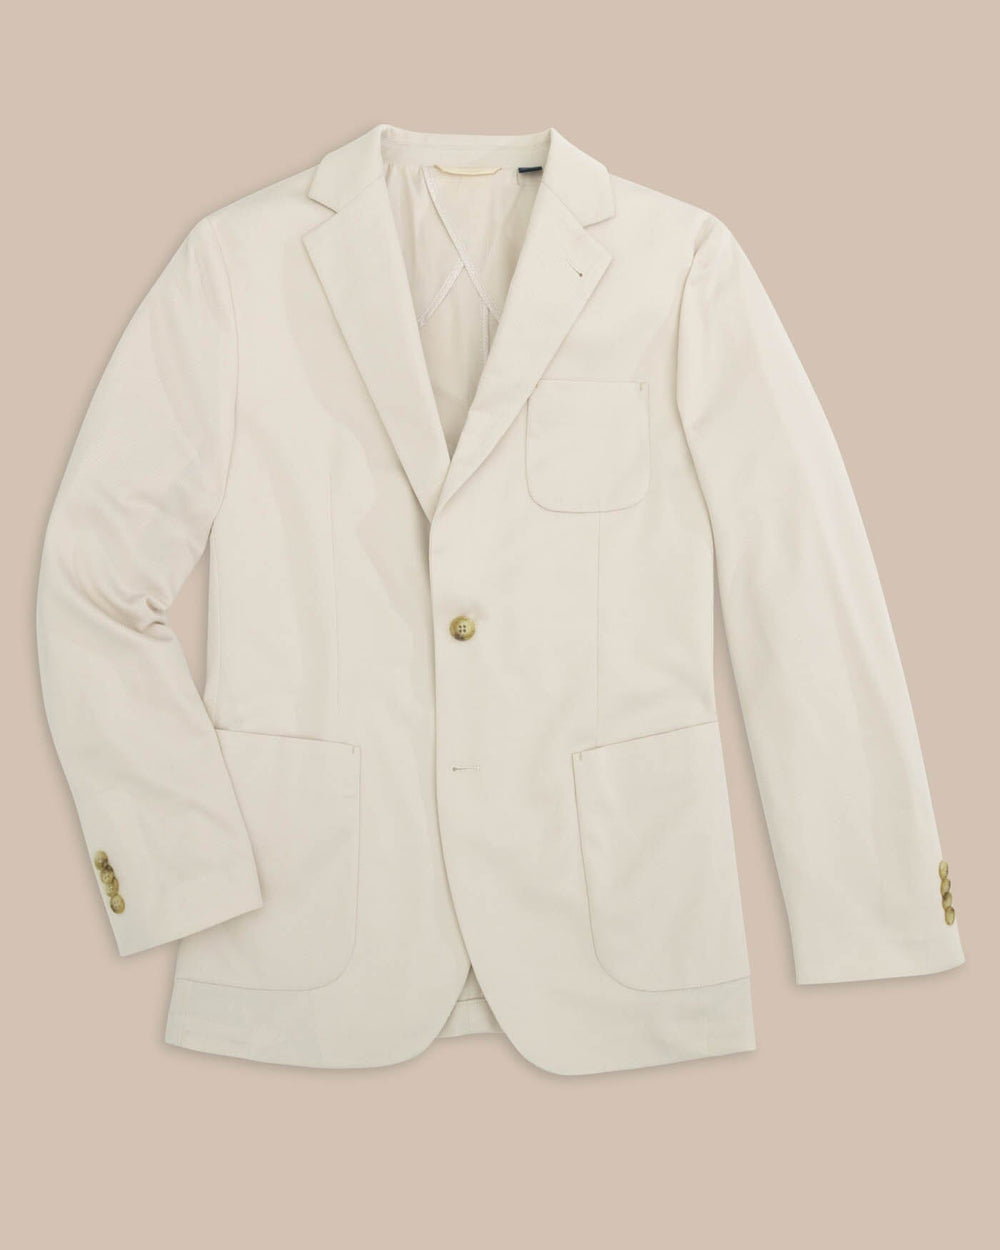 The front view of the Southern Tide Charleston Navy Blazer by Southern Tide - Perfectly Pale Khaki